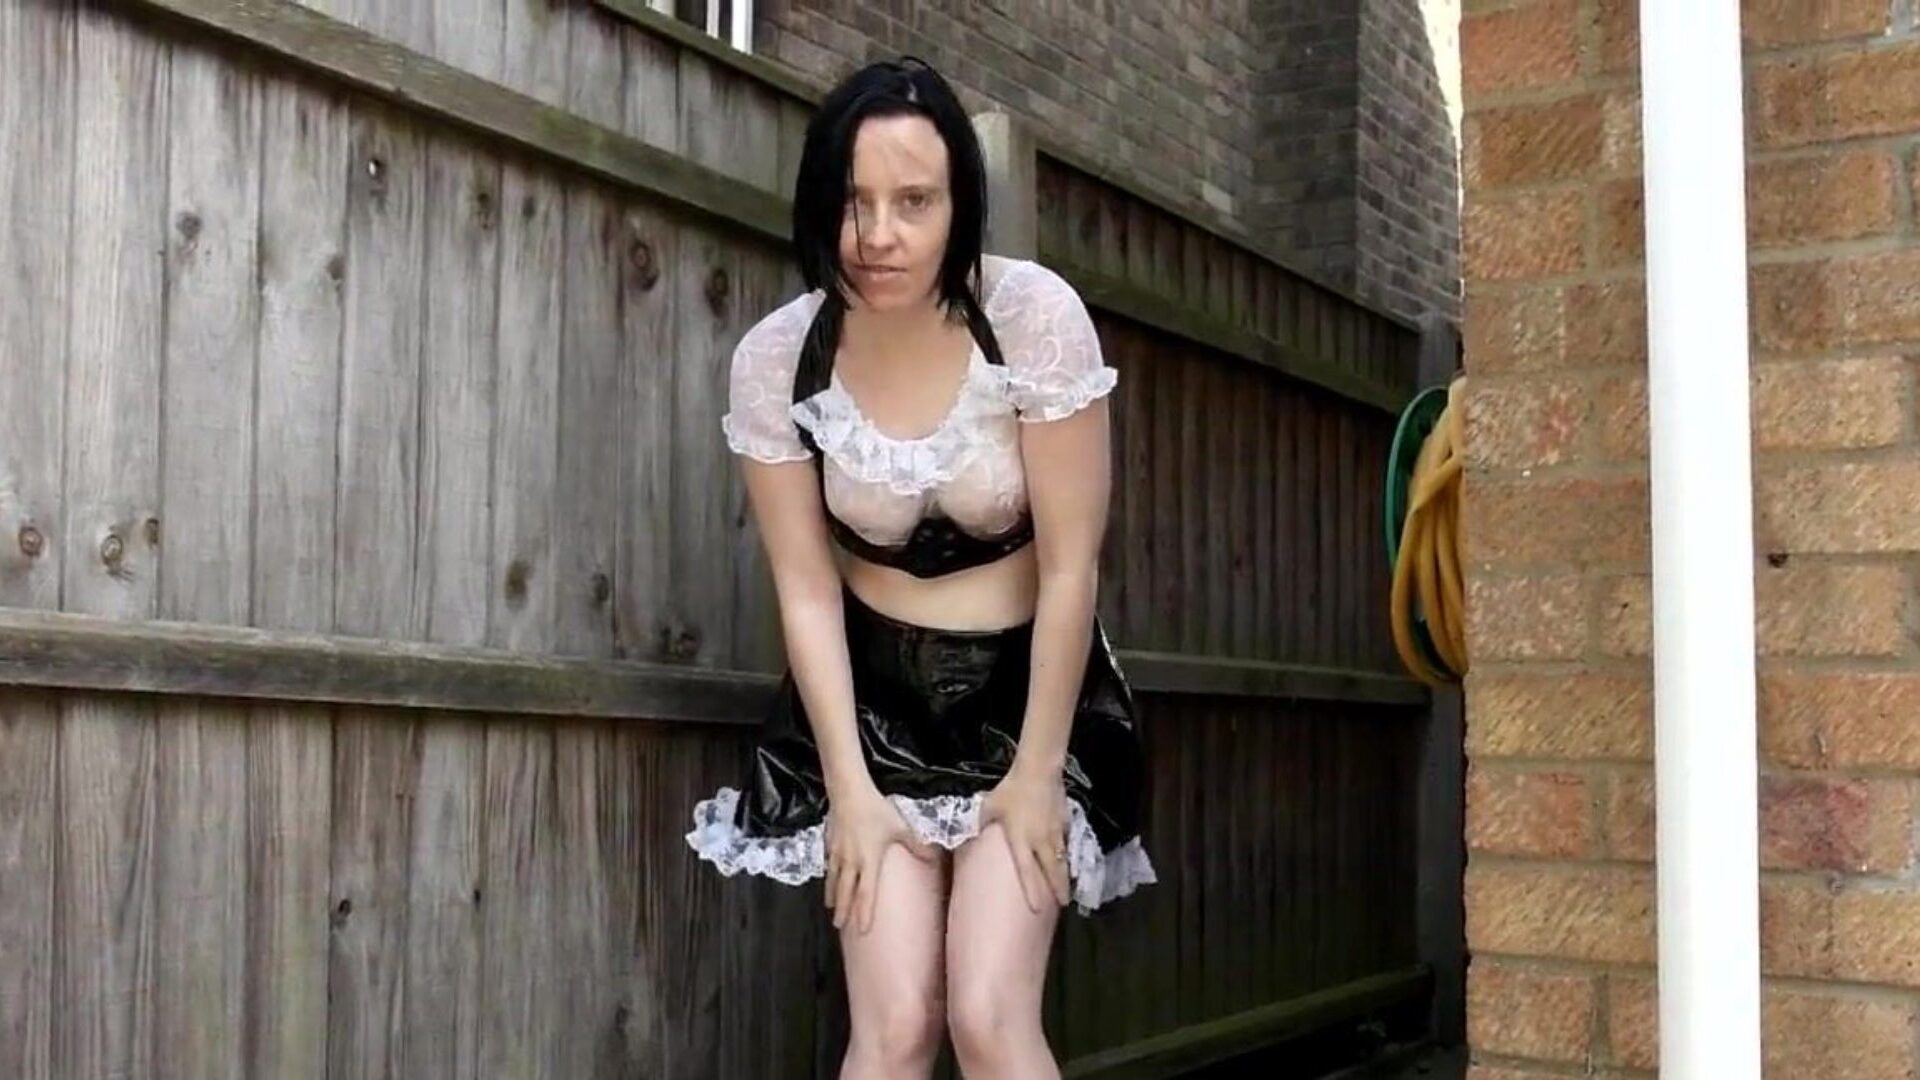 pvc french maid uniform outdoors, free hd porn 63: xhamster watch pvc french maid uniform outdoors film on xhamster, the hottest hd fuck-a-thon tube web with lots of free-for-all british french mobile & french xxx porno clips